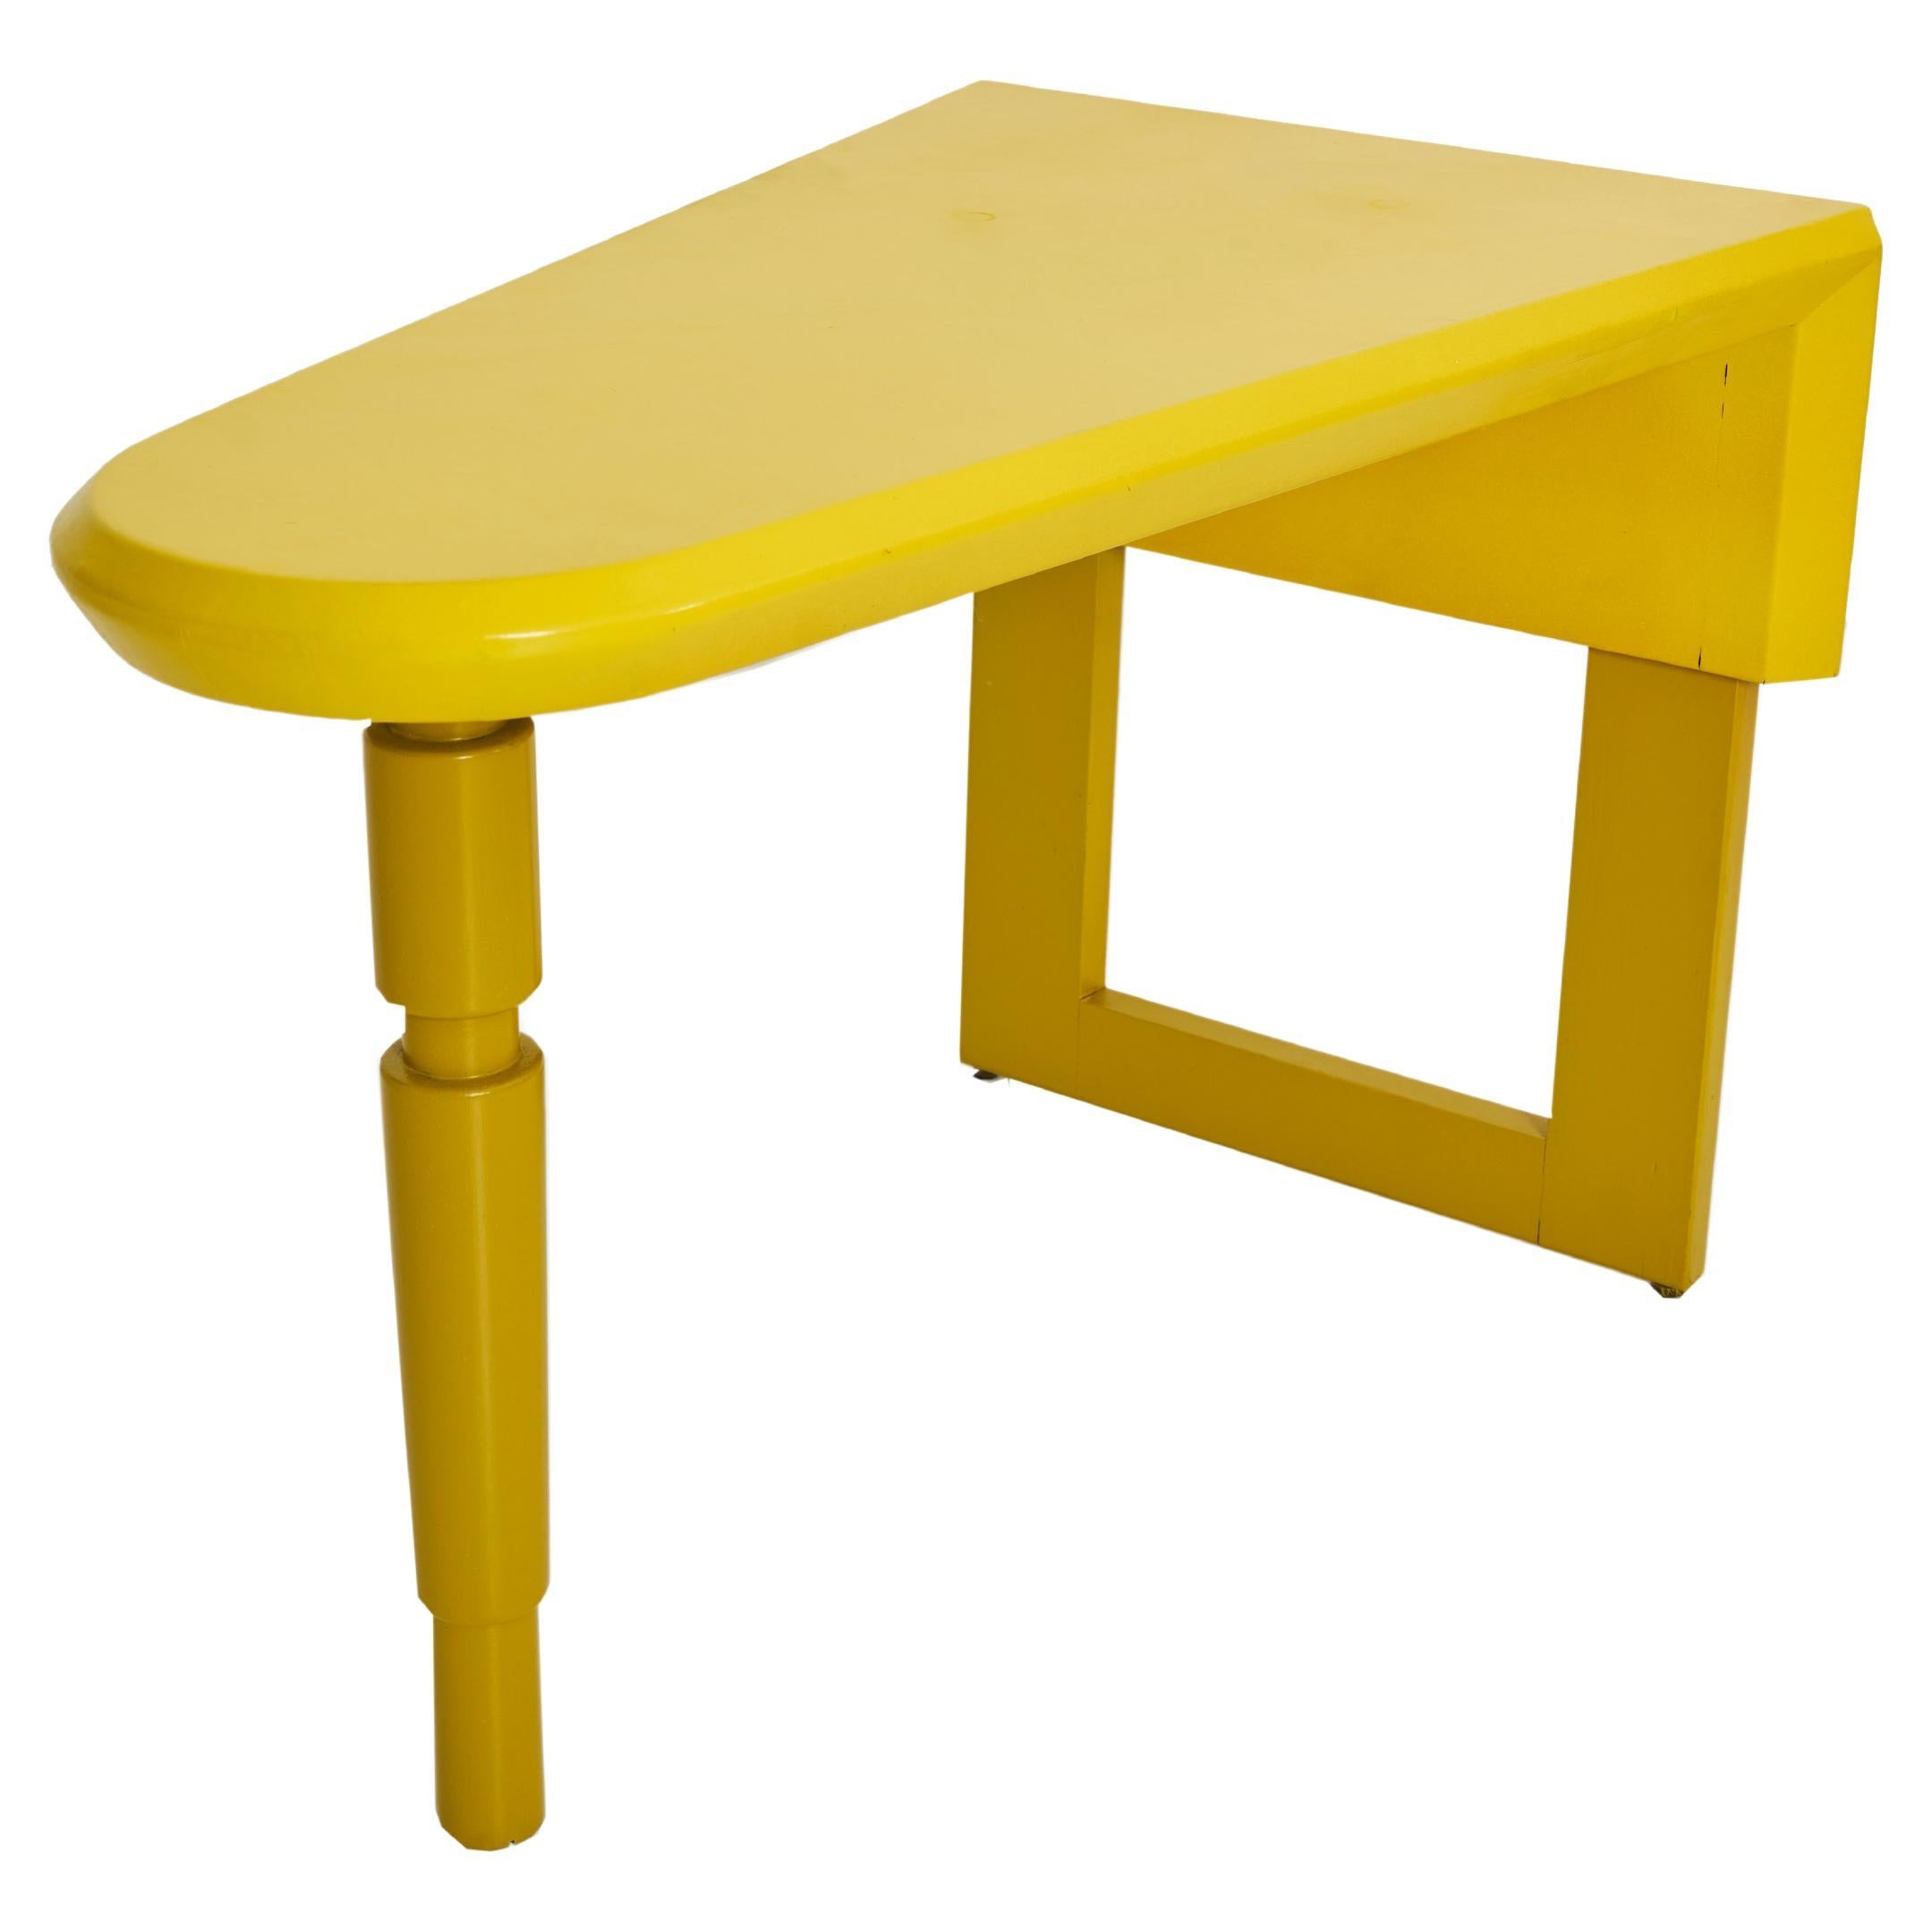 A Unique Yellow Leather Wrapped Side Table by William Haines